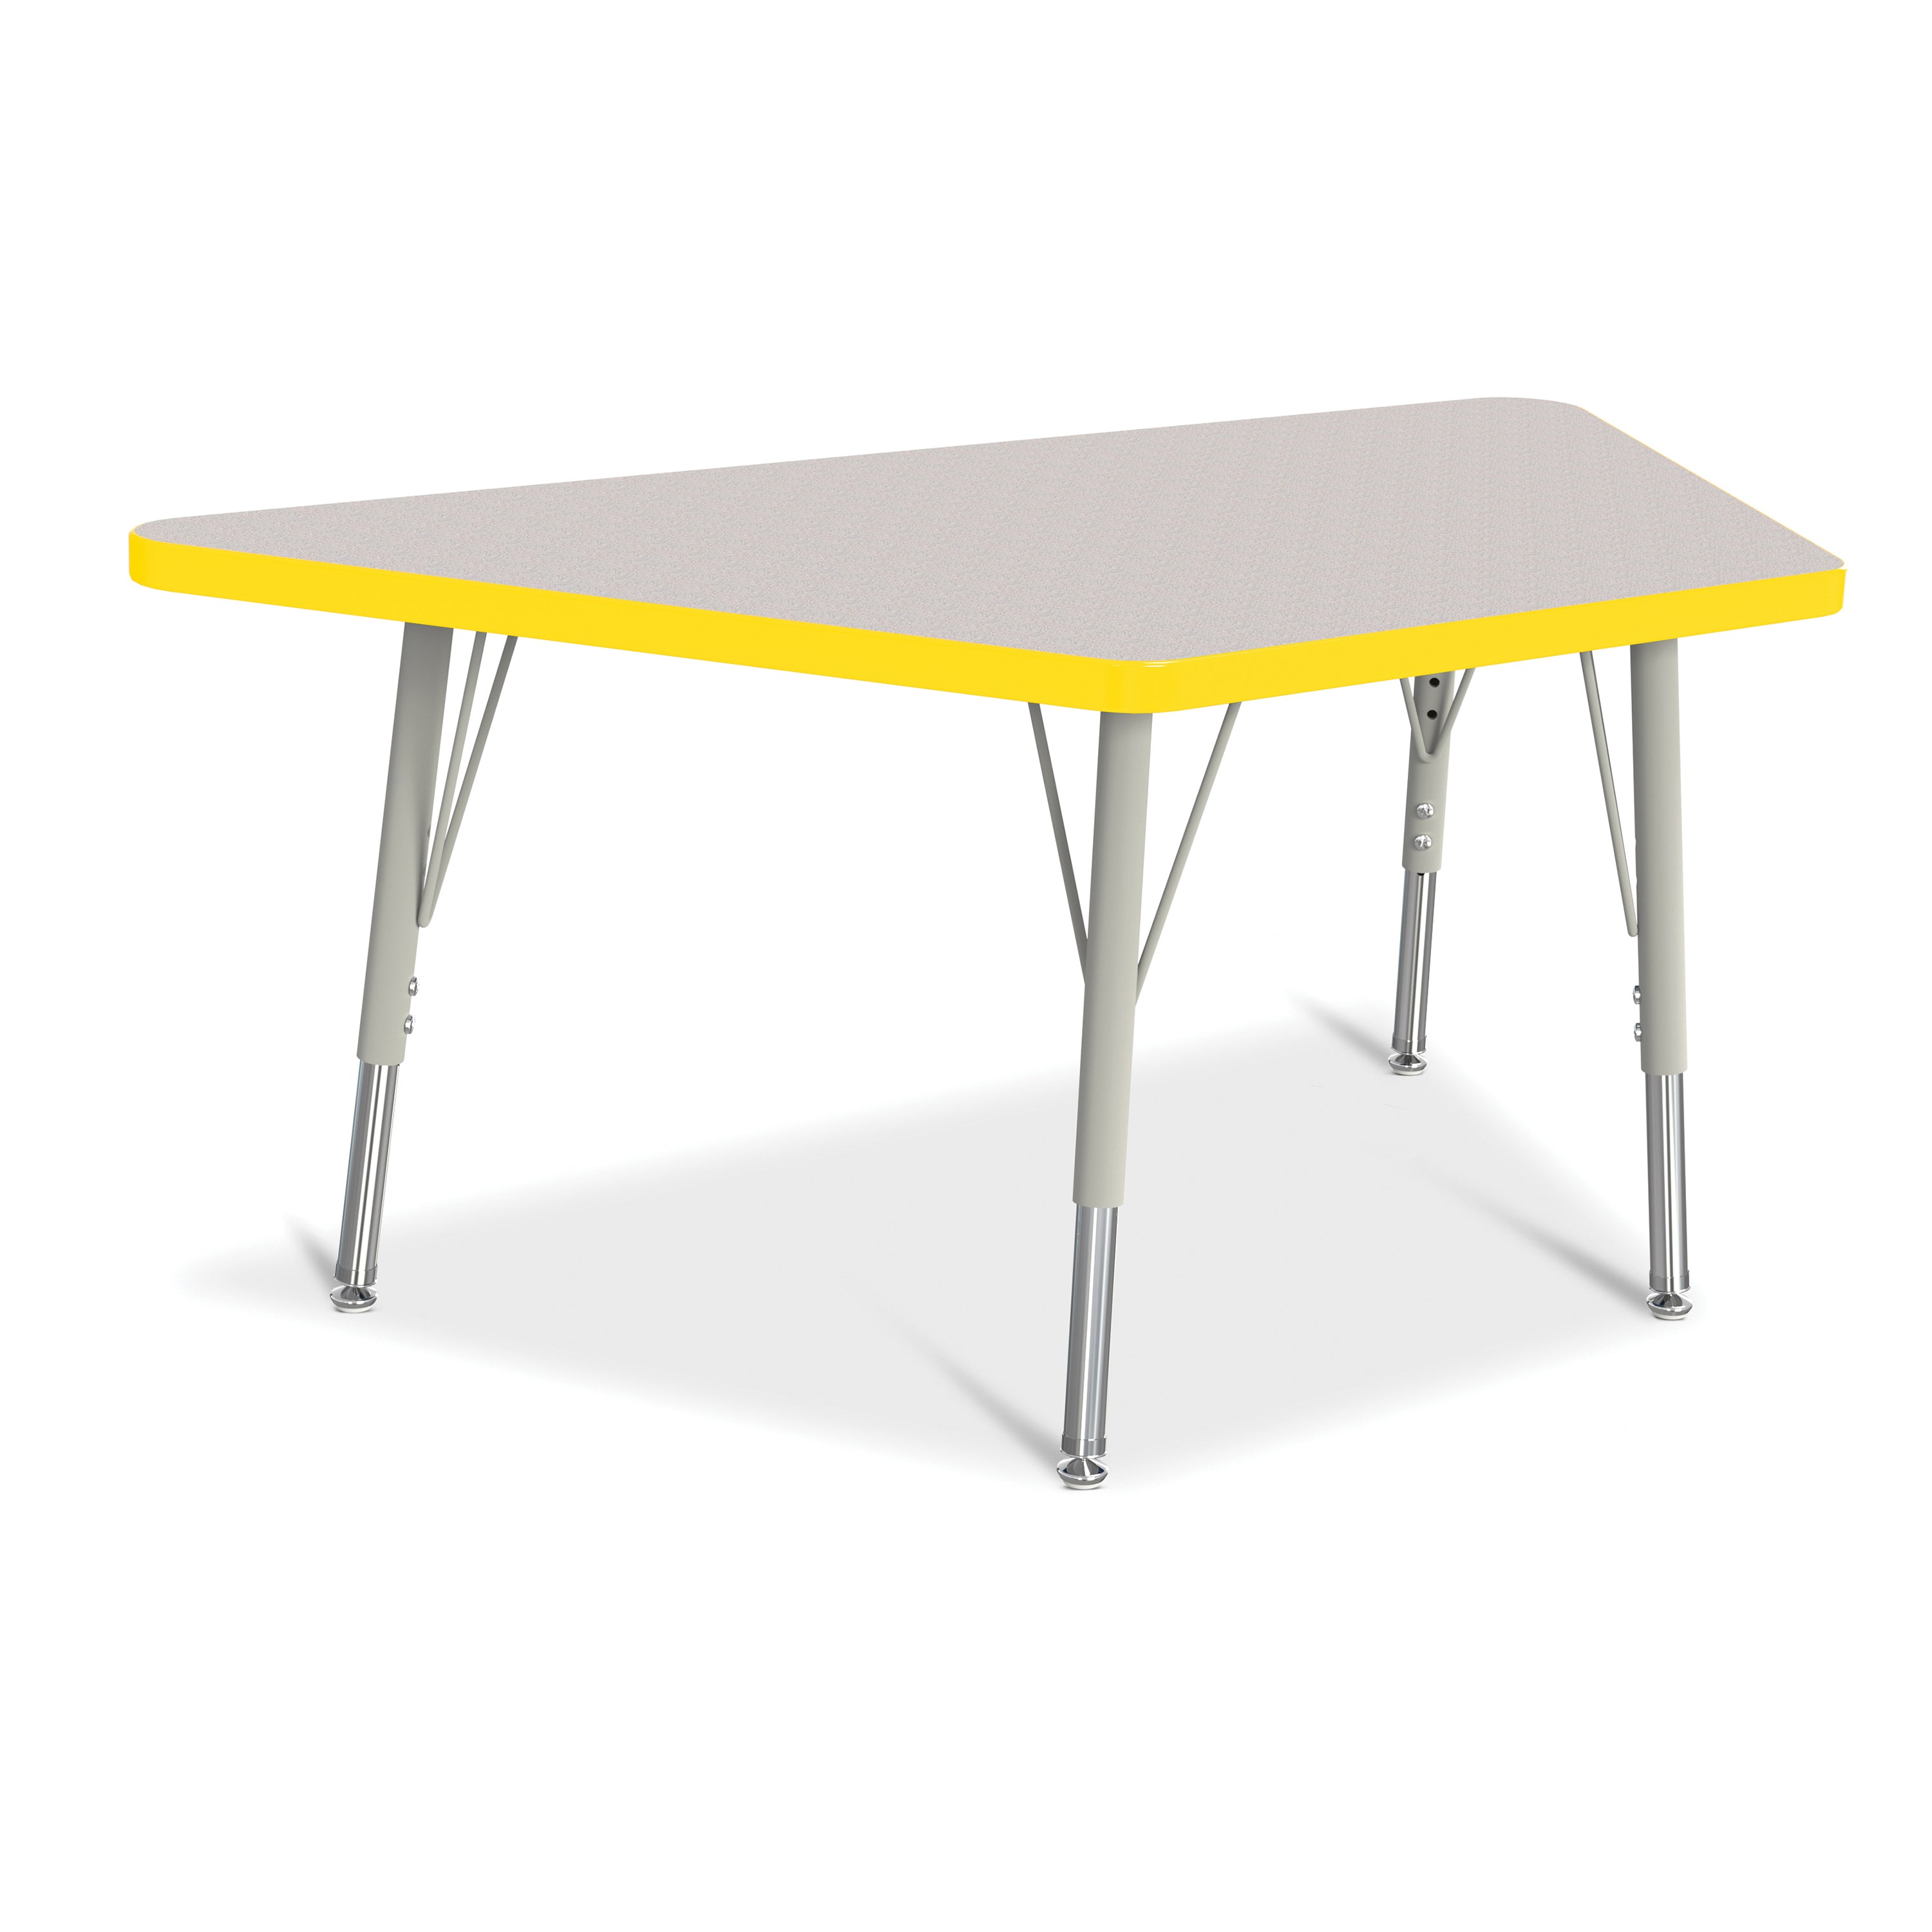 6438JCE007, Berries Trapezoid Activity Tables - 24" X 48", E-height - Freckled Gray/Yellow/Gray